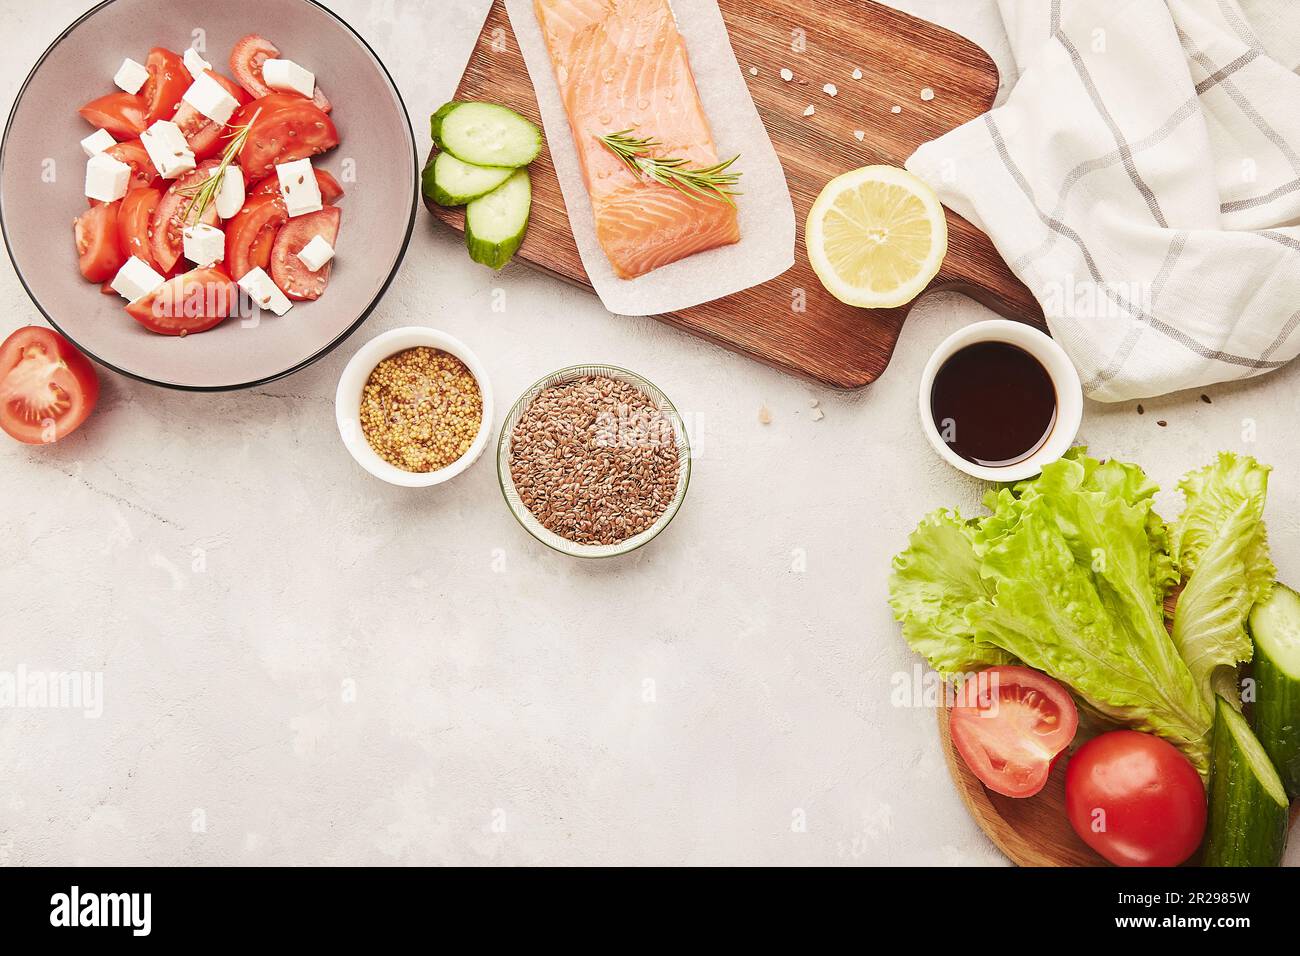 Ingredients for Ketogenic, Paleo, FODMAP diet menu concept. Fruits, vegetables, smoked salmon, salad with feta and greens on wooden cutting board Stock Photo